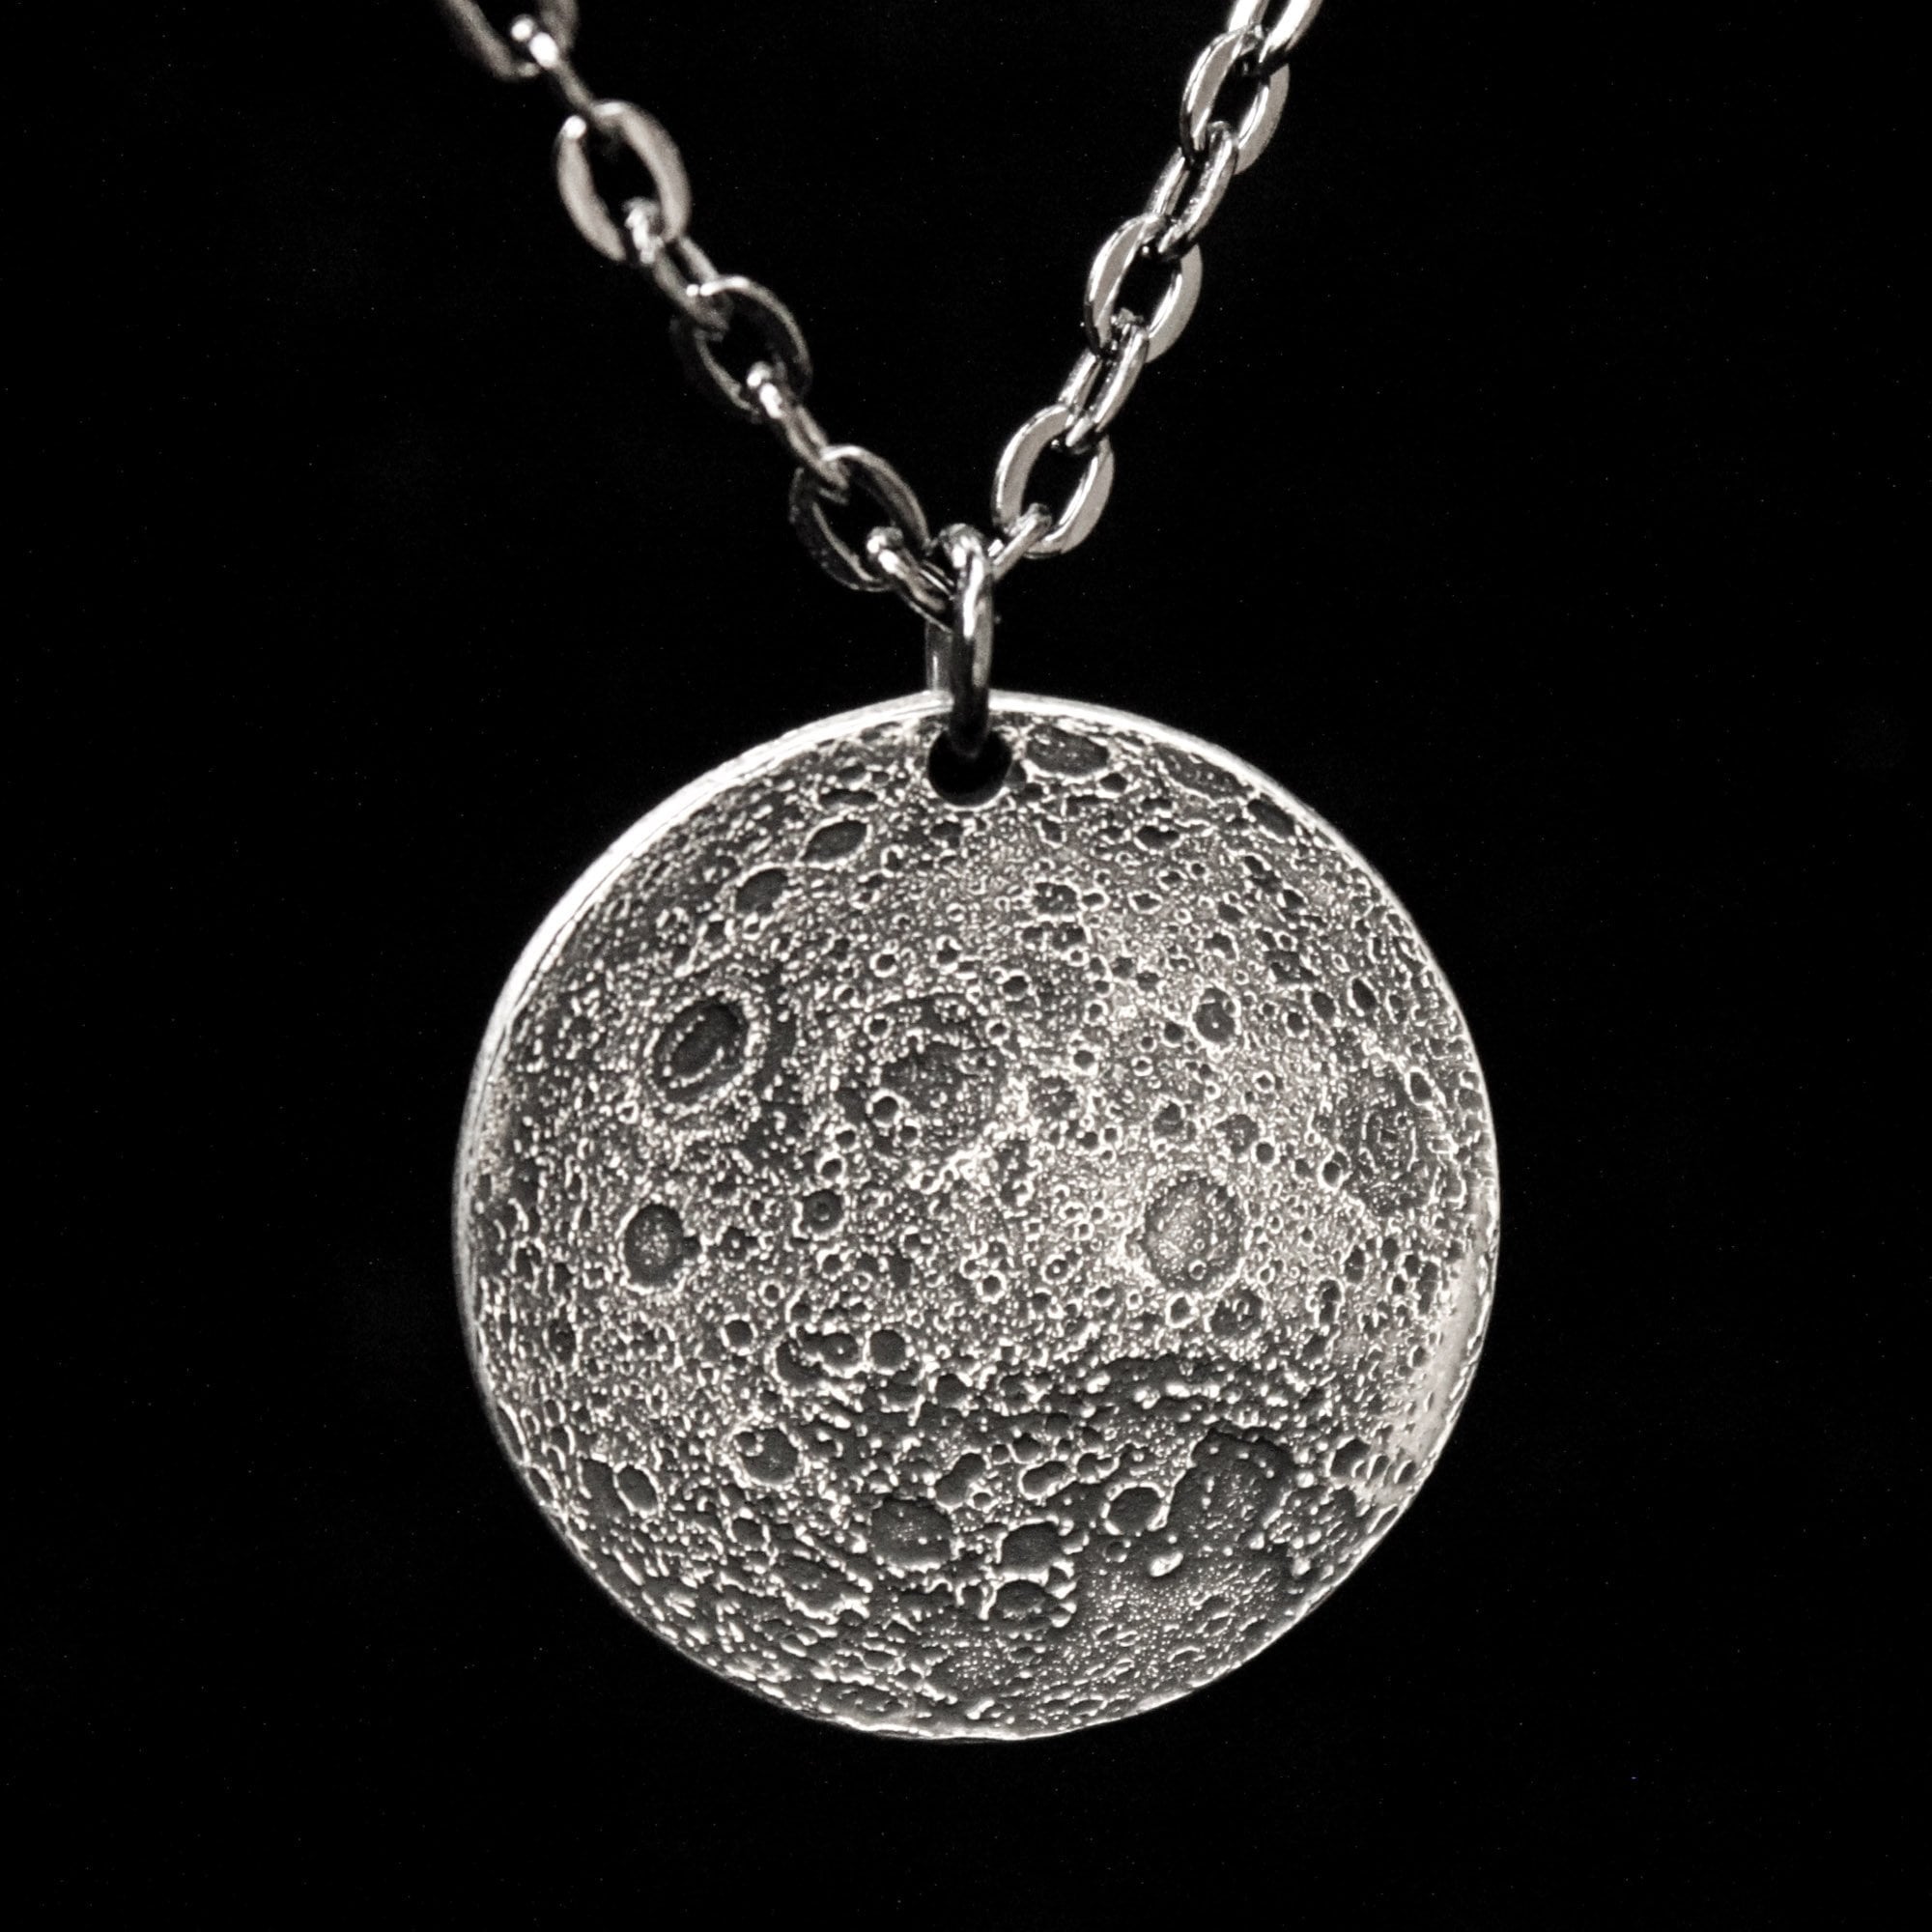 Full Moon 1/4 oz Silver Necklace on 30" chain by Shire Post Mint - far side of the moon